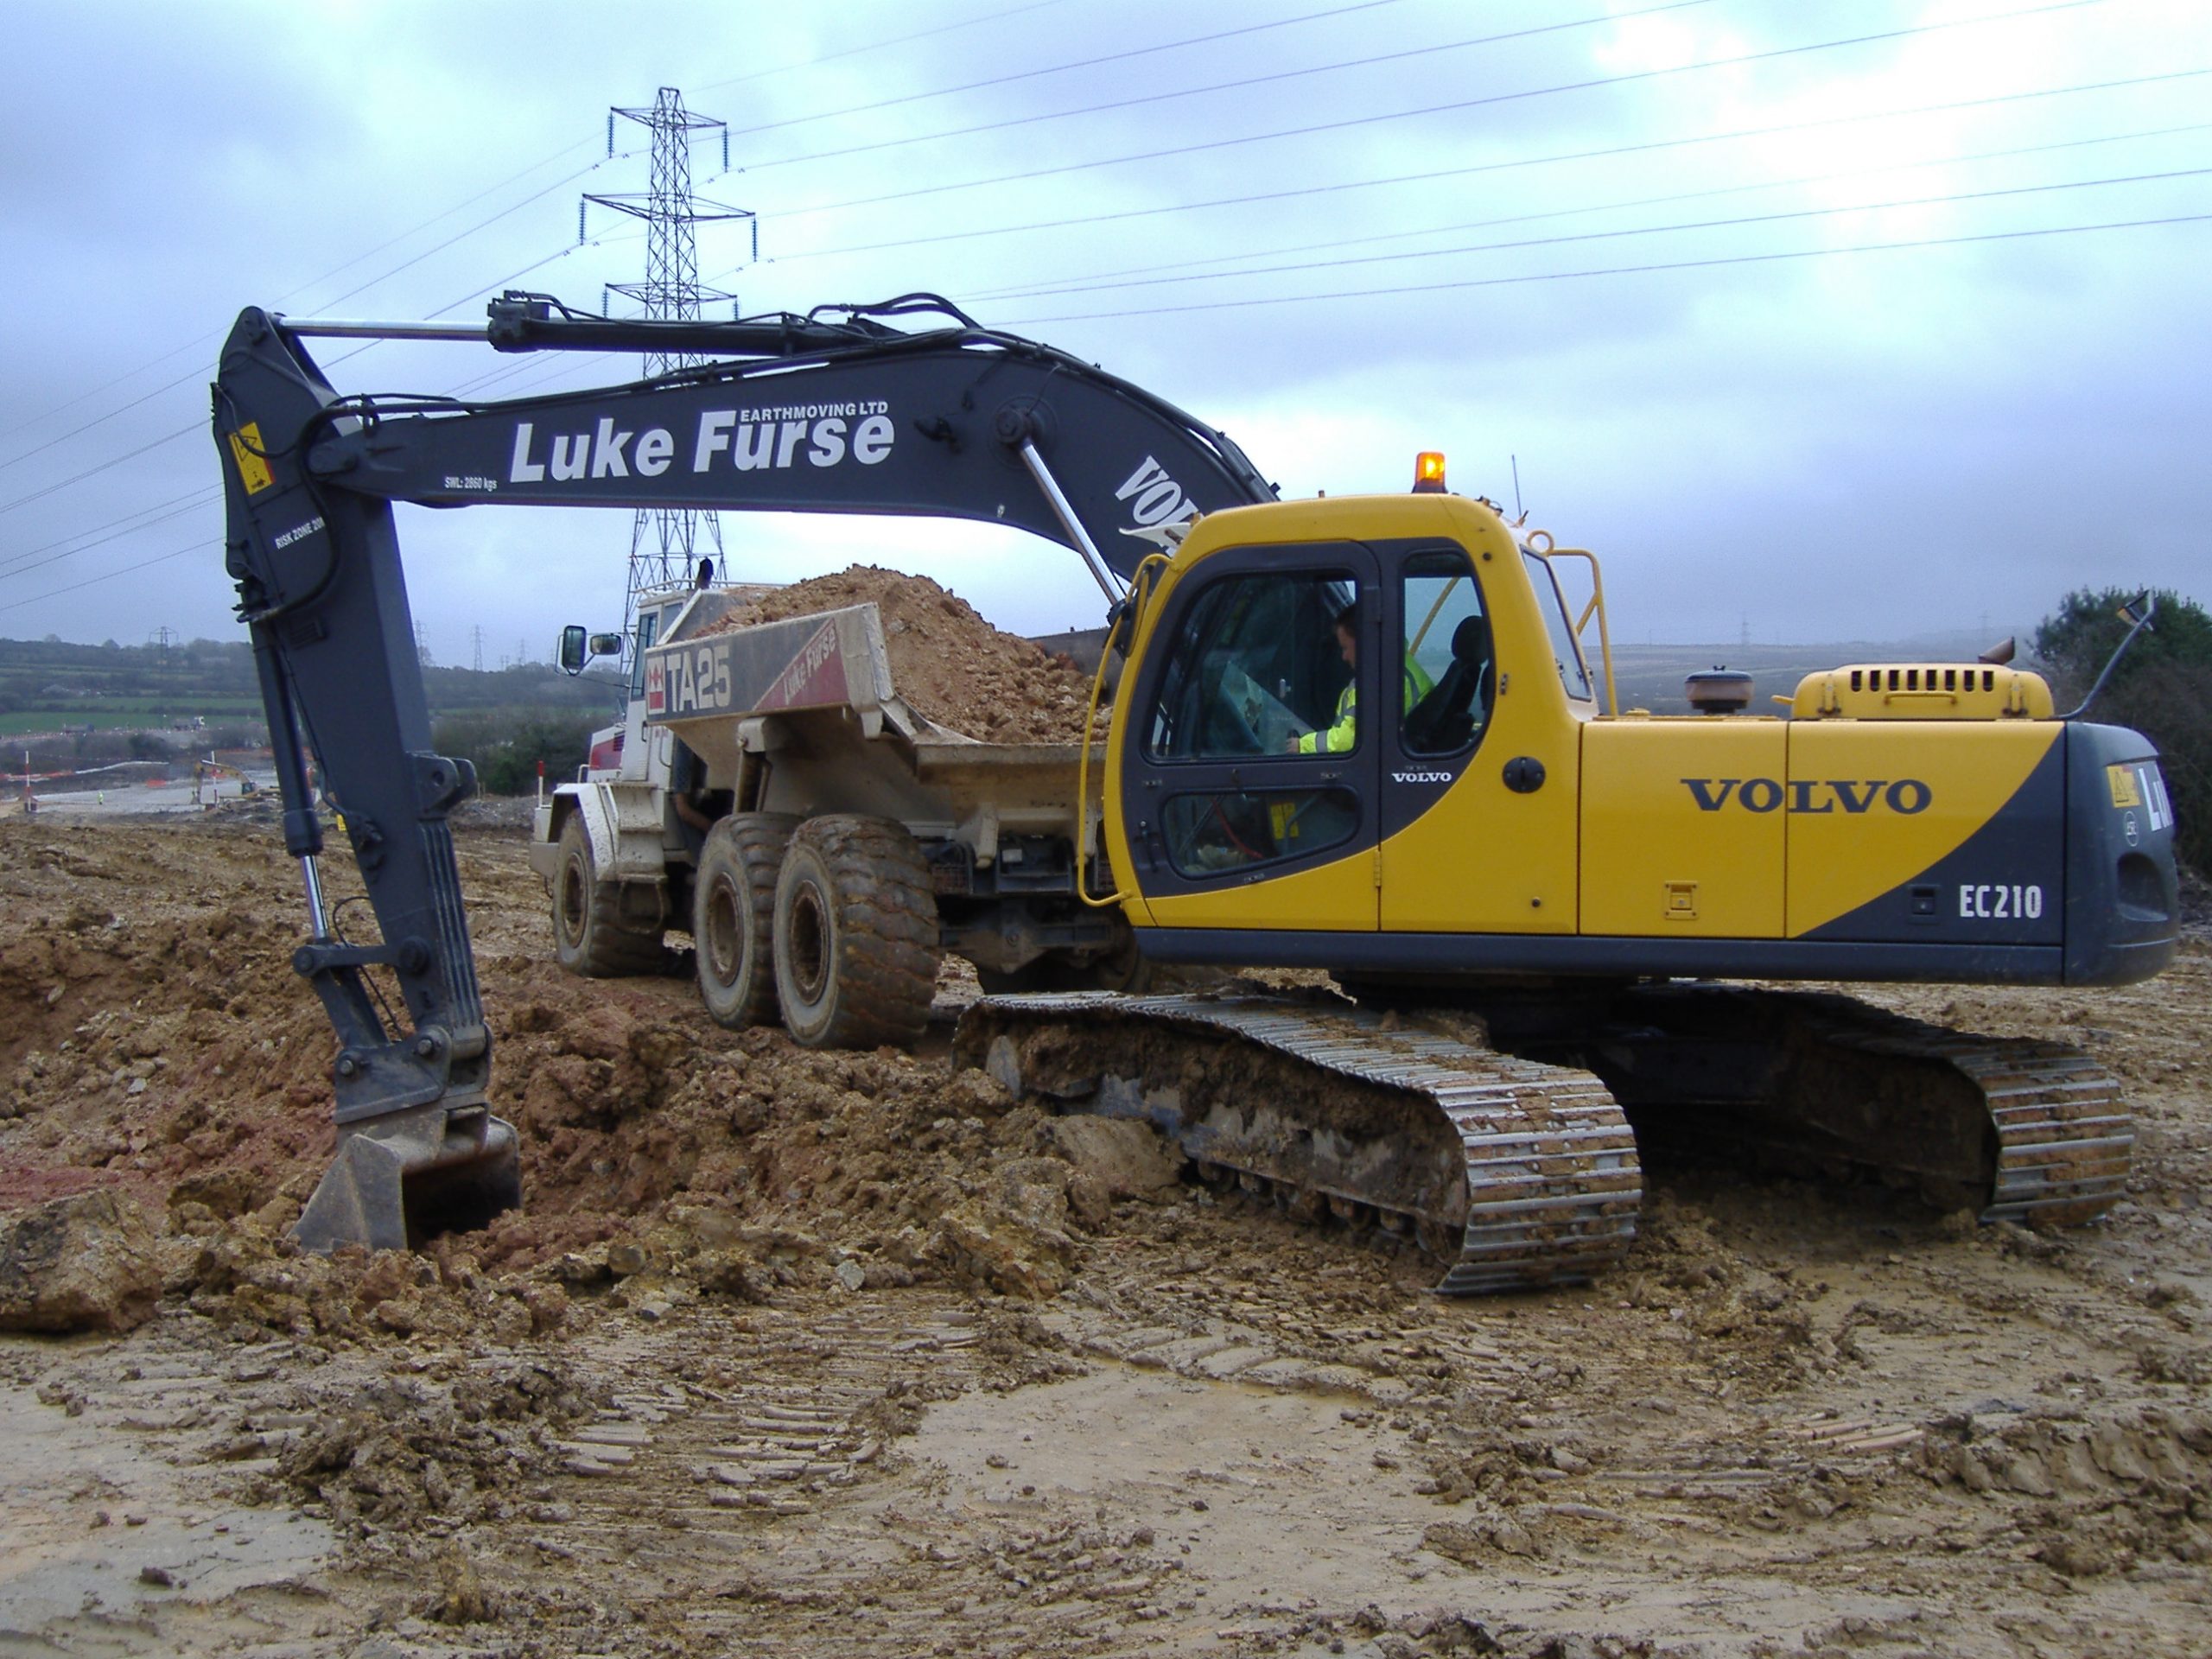 Volvo Excavator Final Drives and Travel Motors